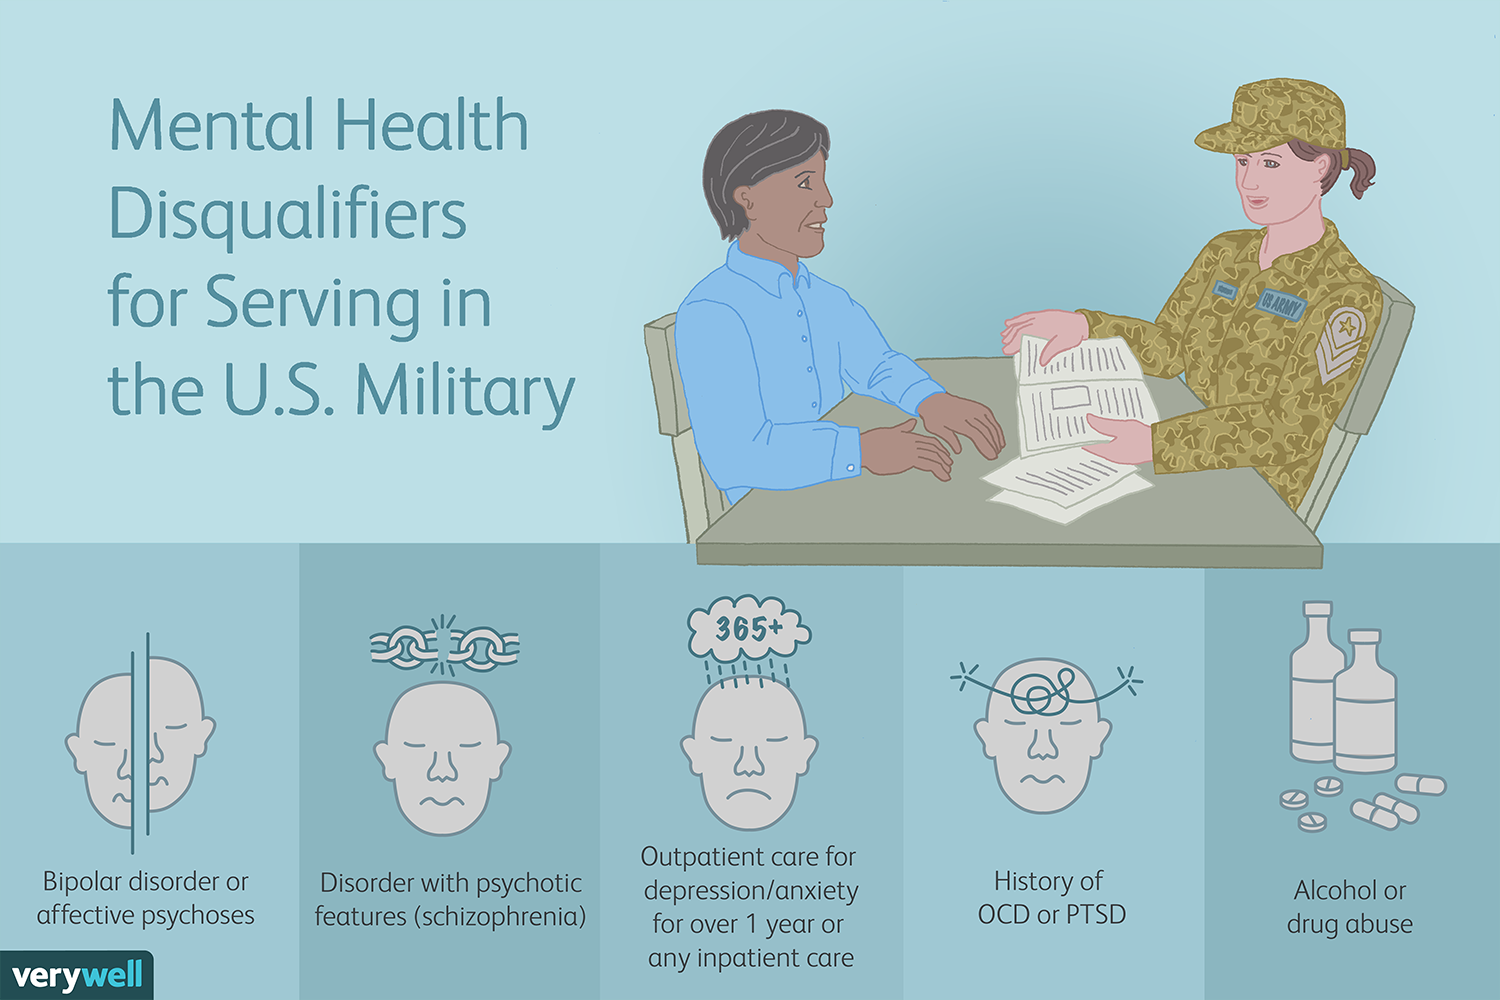 Can You Serve in the U.S. Military With Mental Illness?